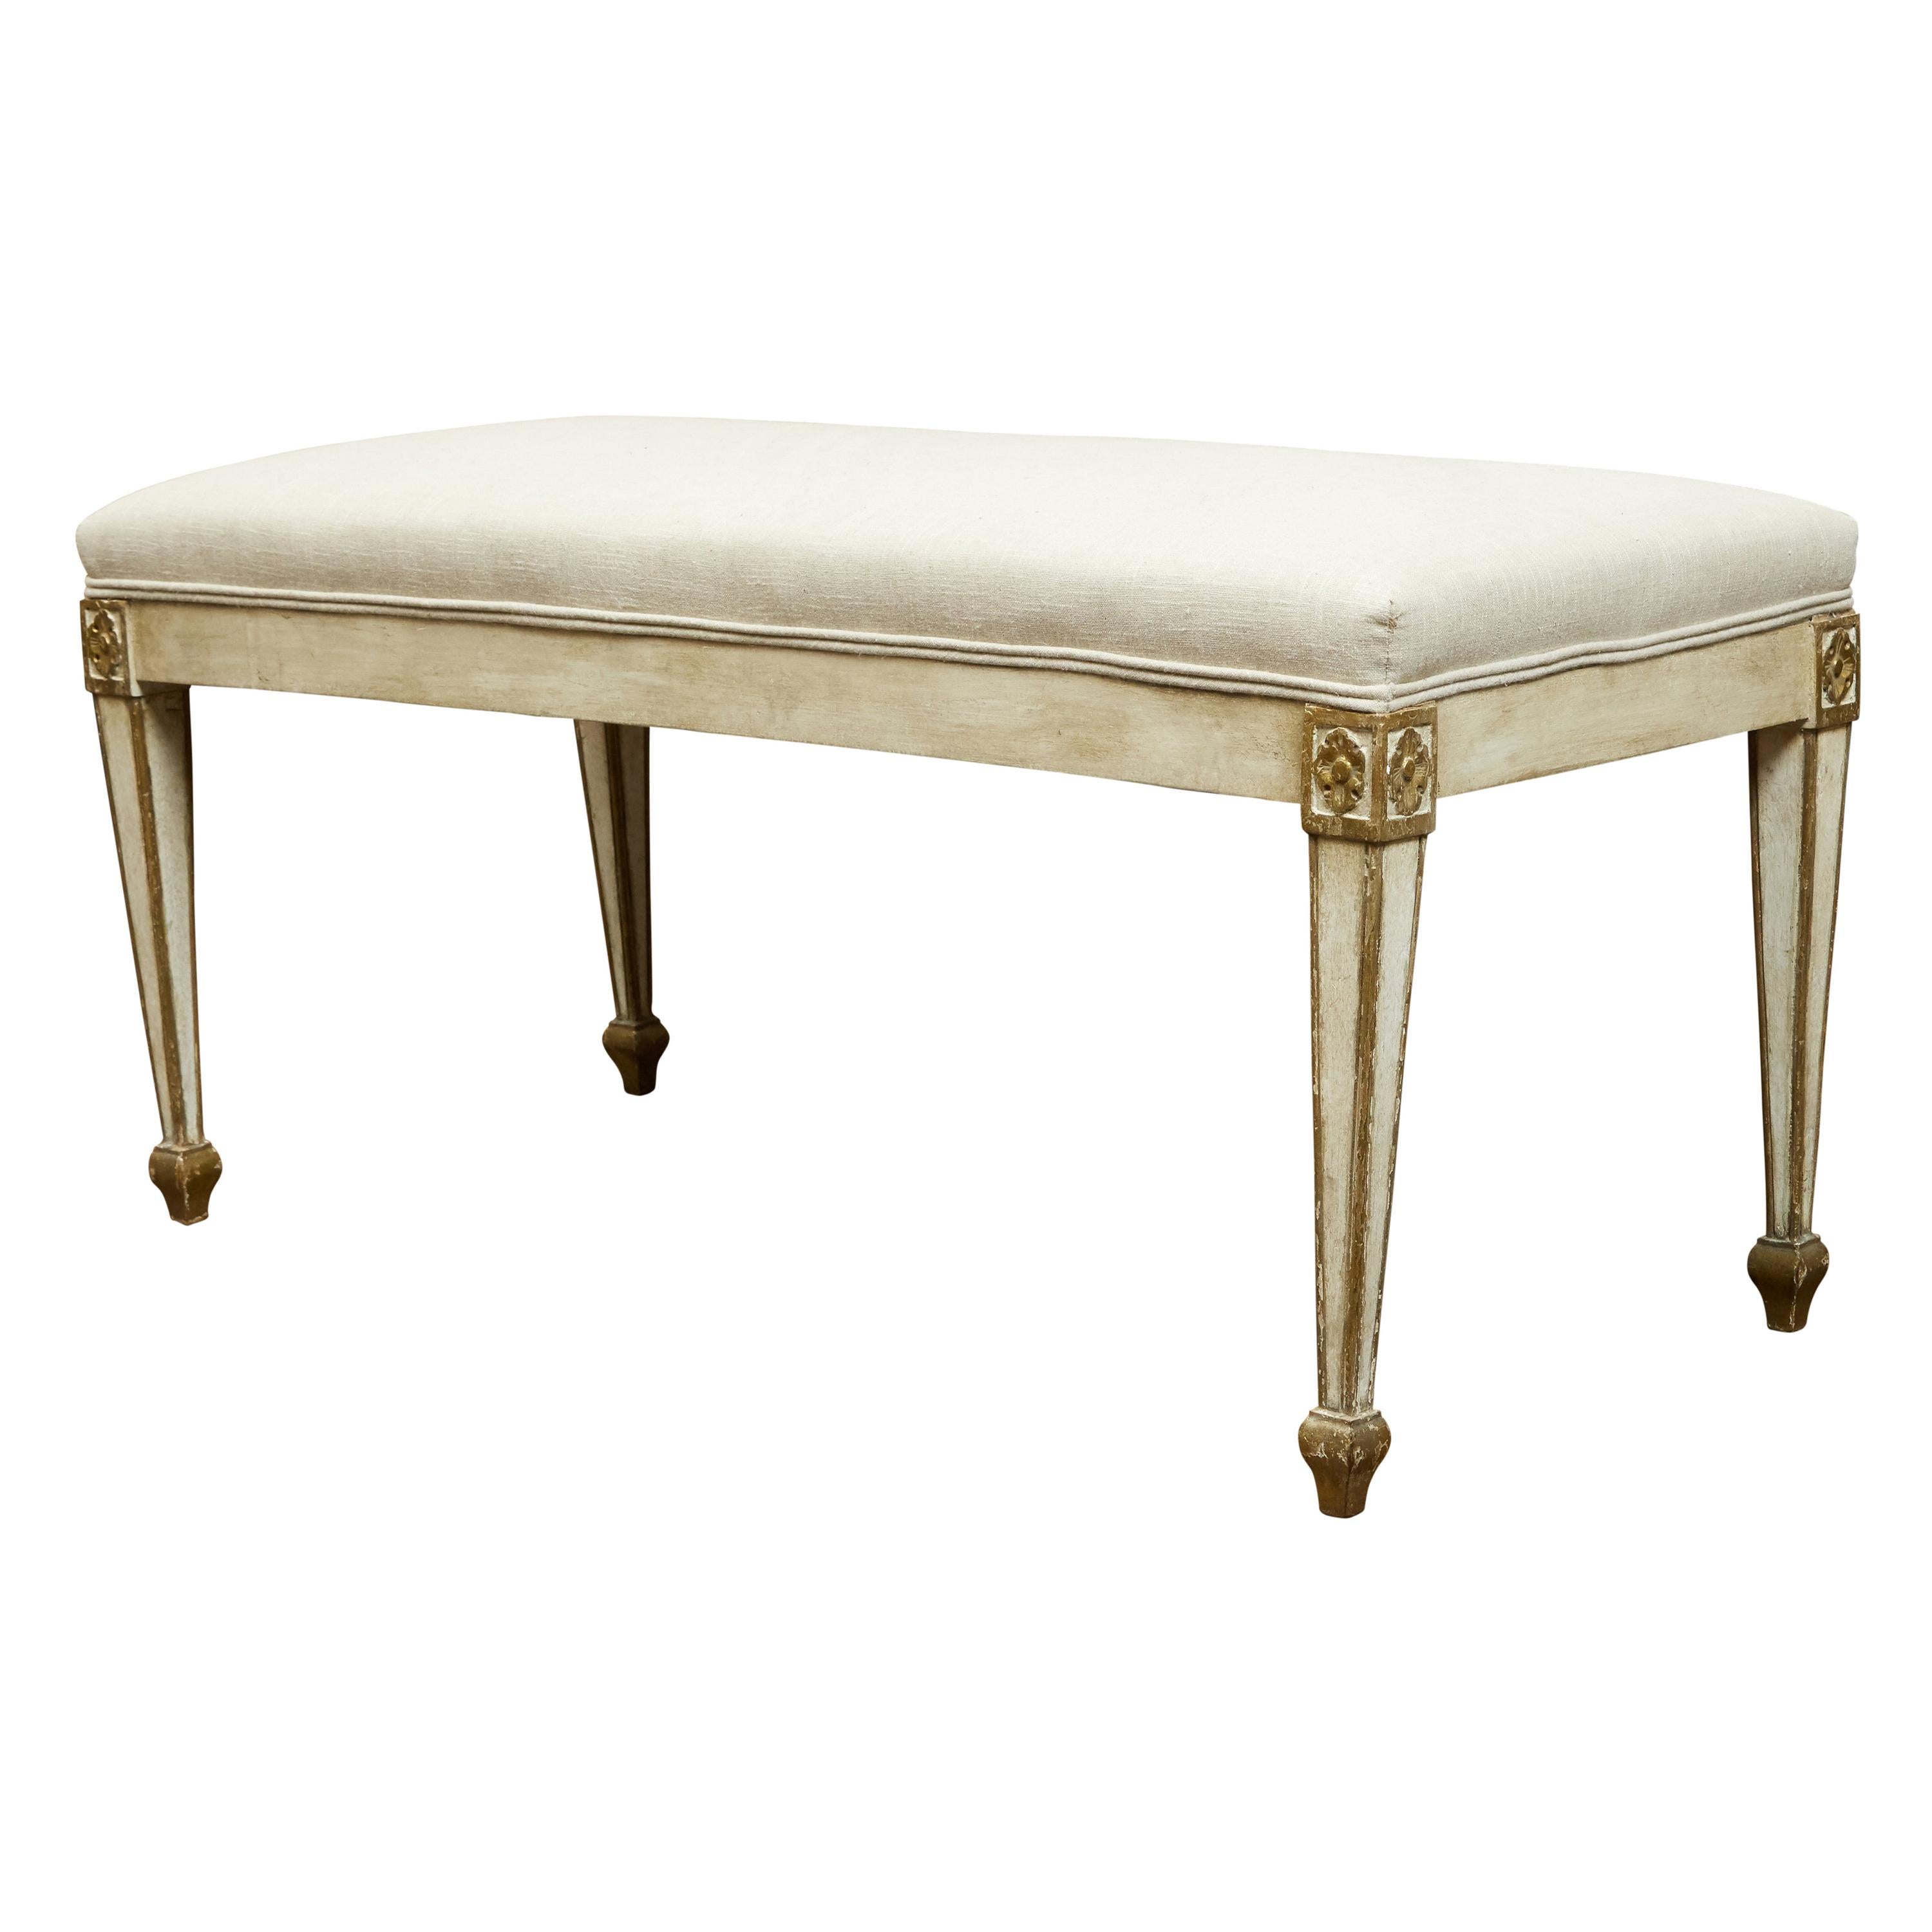 Italian 19th Century Neoclassical Style Painted Bench with Gilded Rosettes